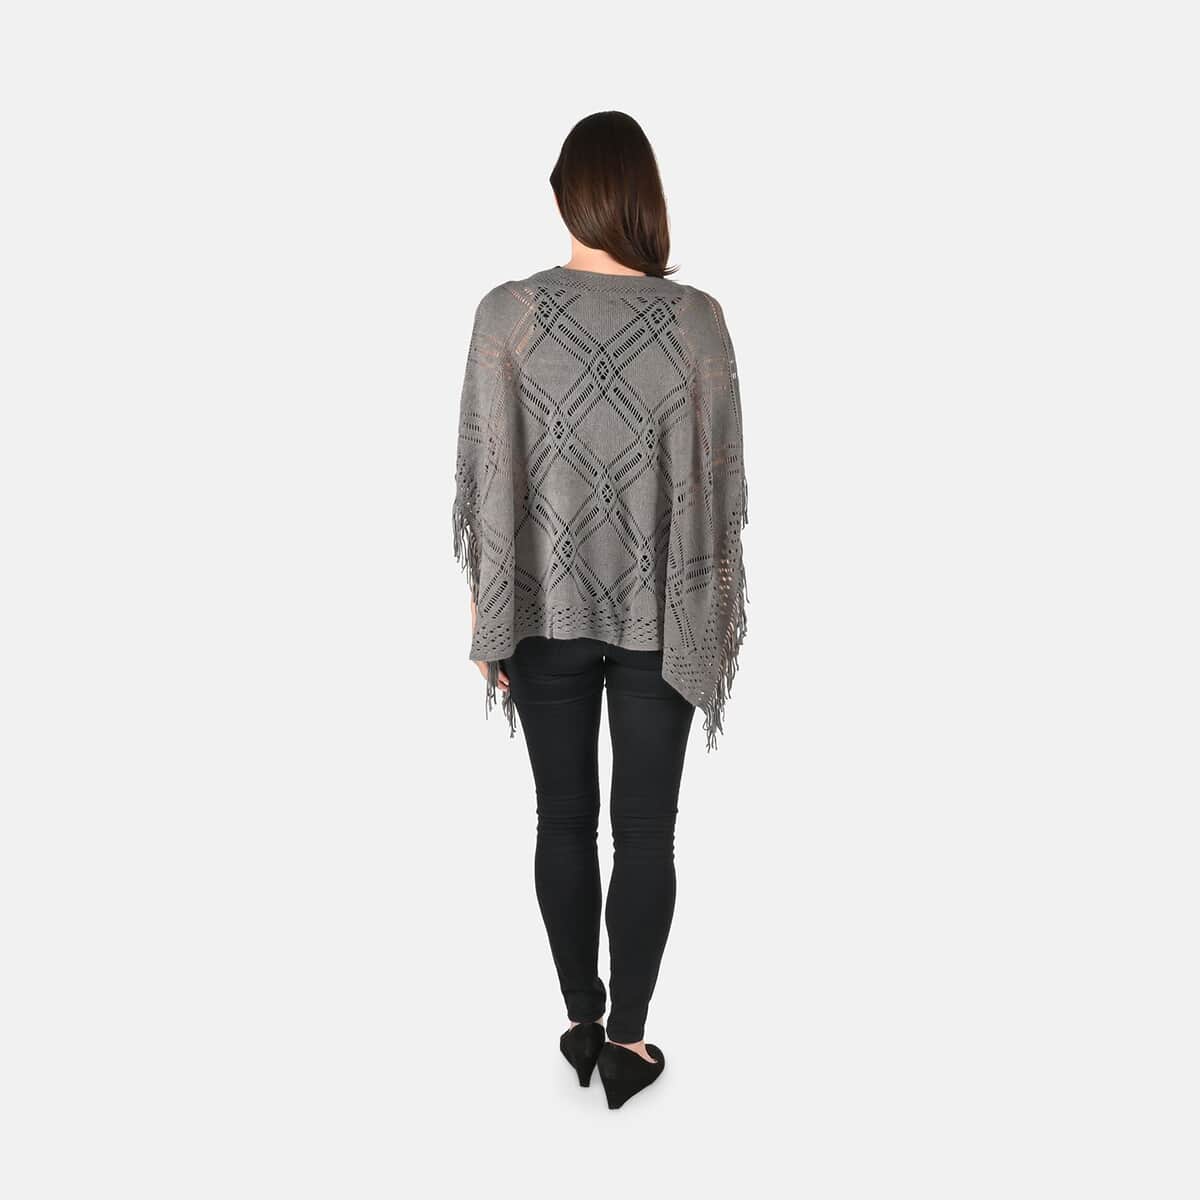 Passage Knitted Dark Gray Poncho with Tassels (One Size Fits Most) image number 1